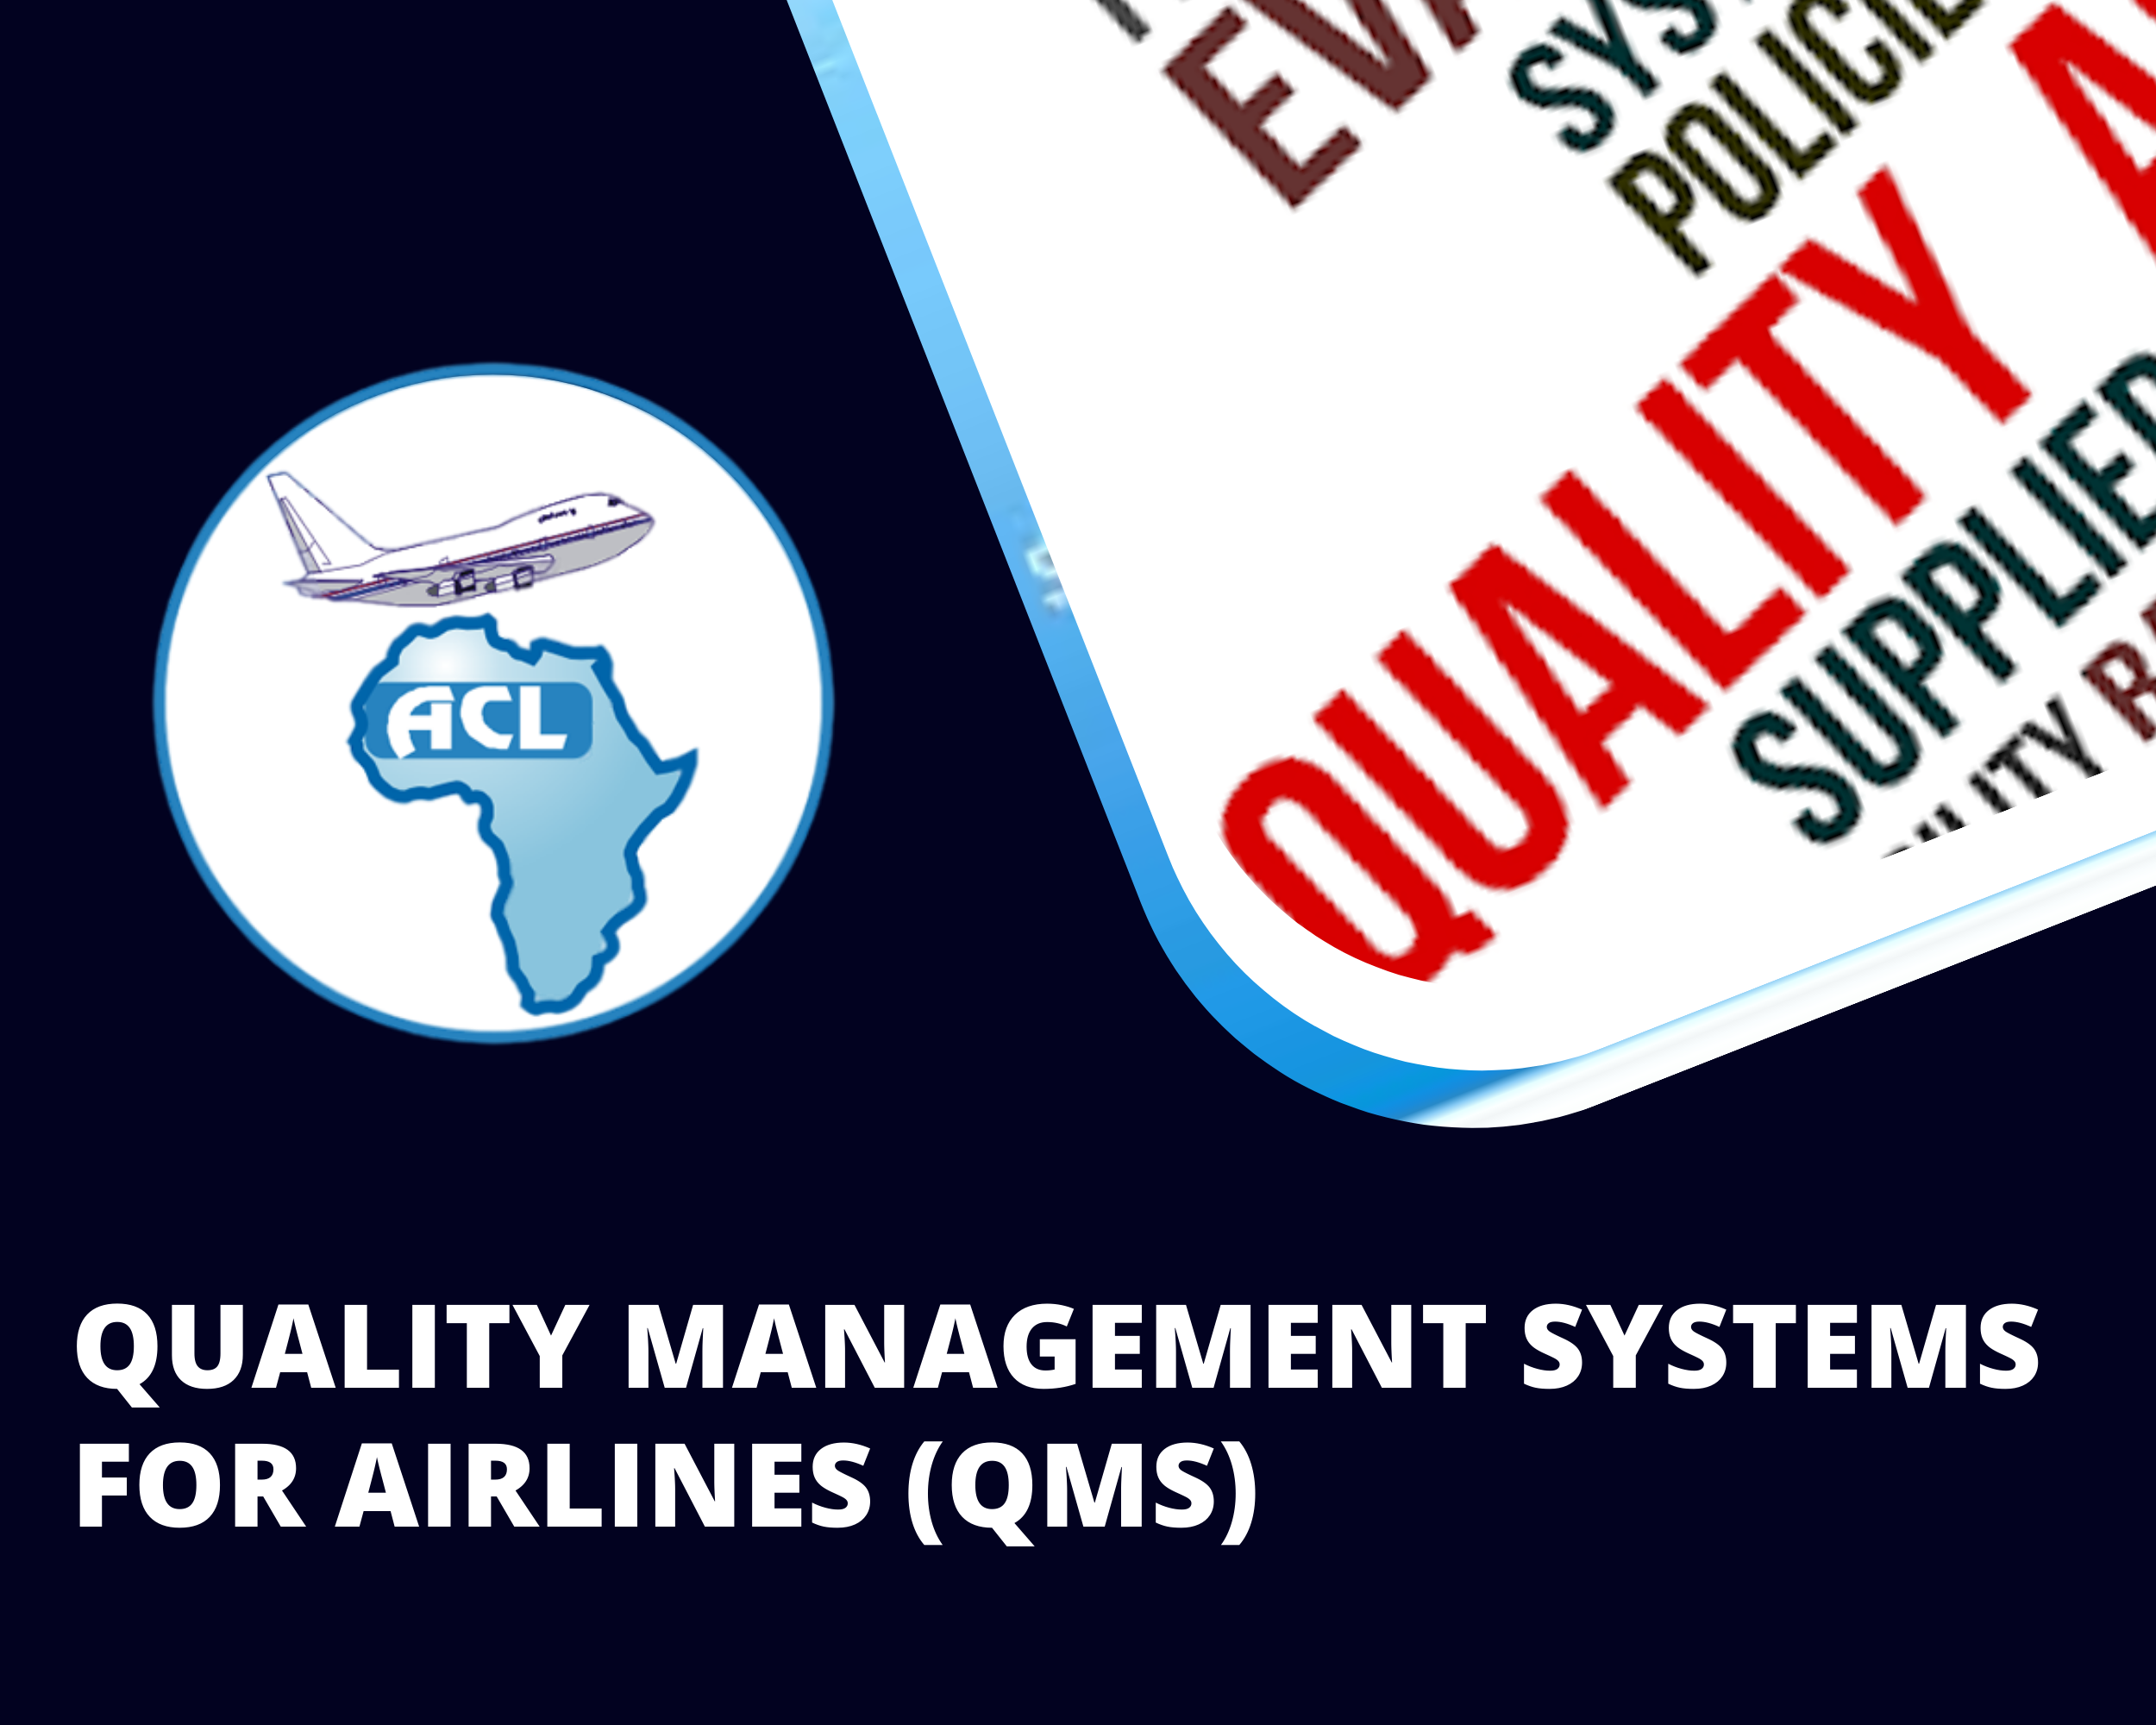 QUALITY MANAGEMENT SYSTEMS FOR AIRLINES (QMS)